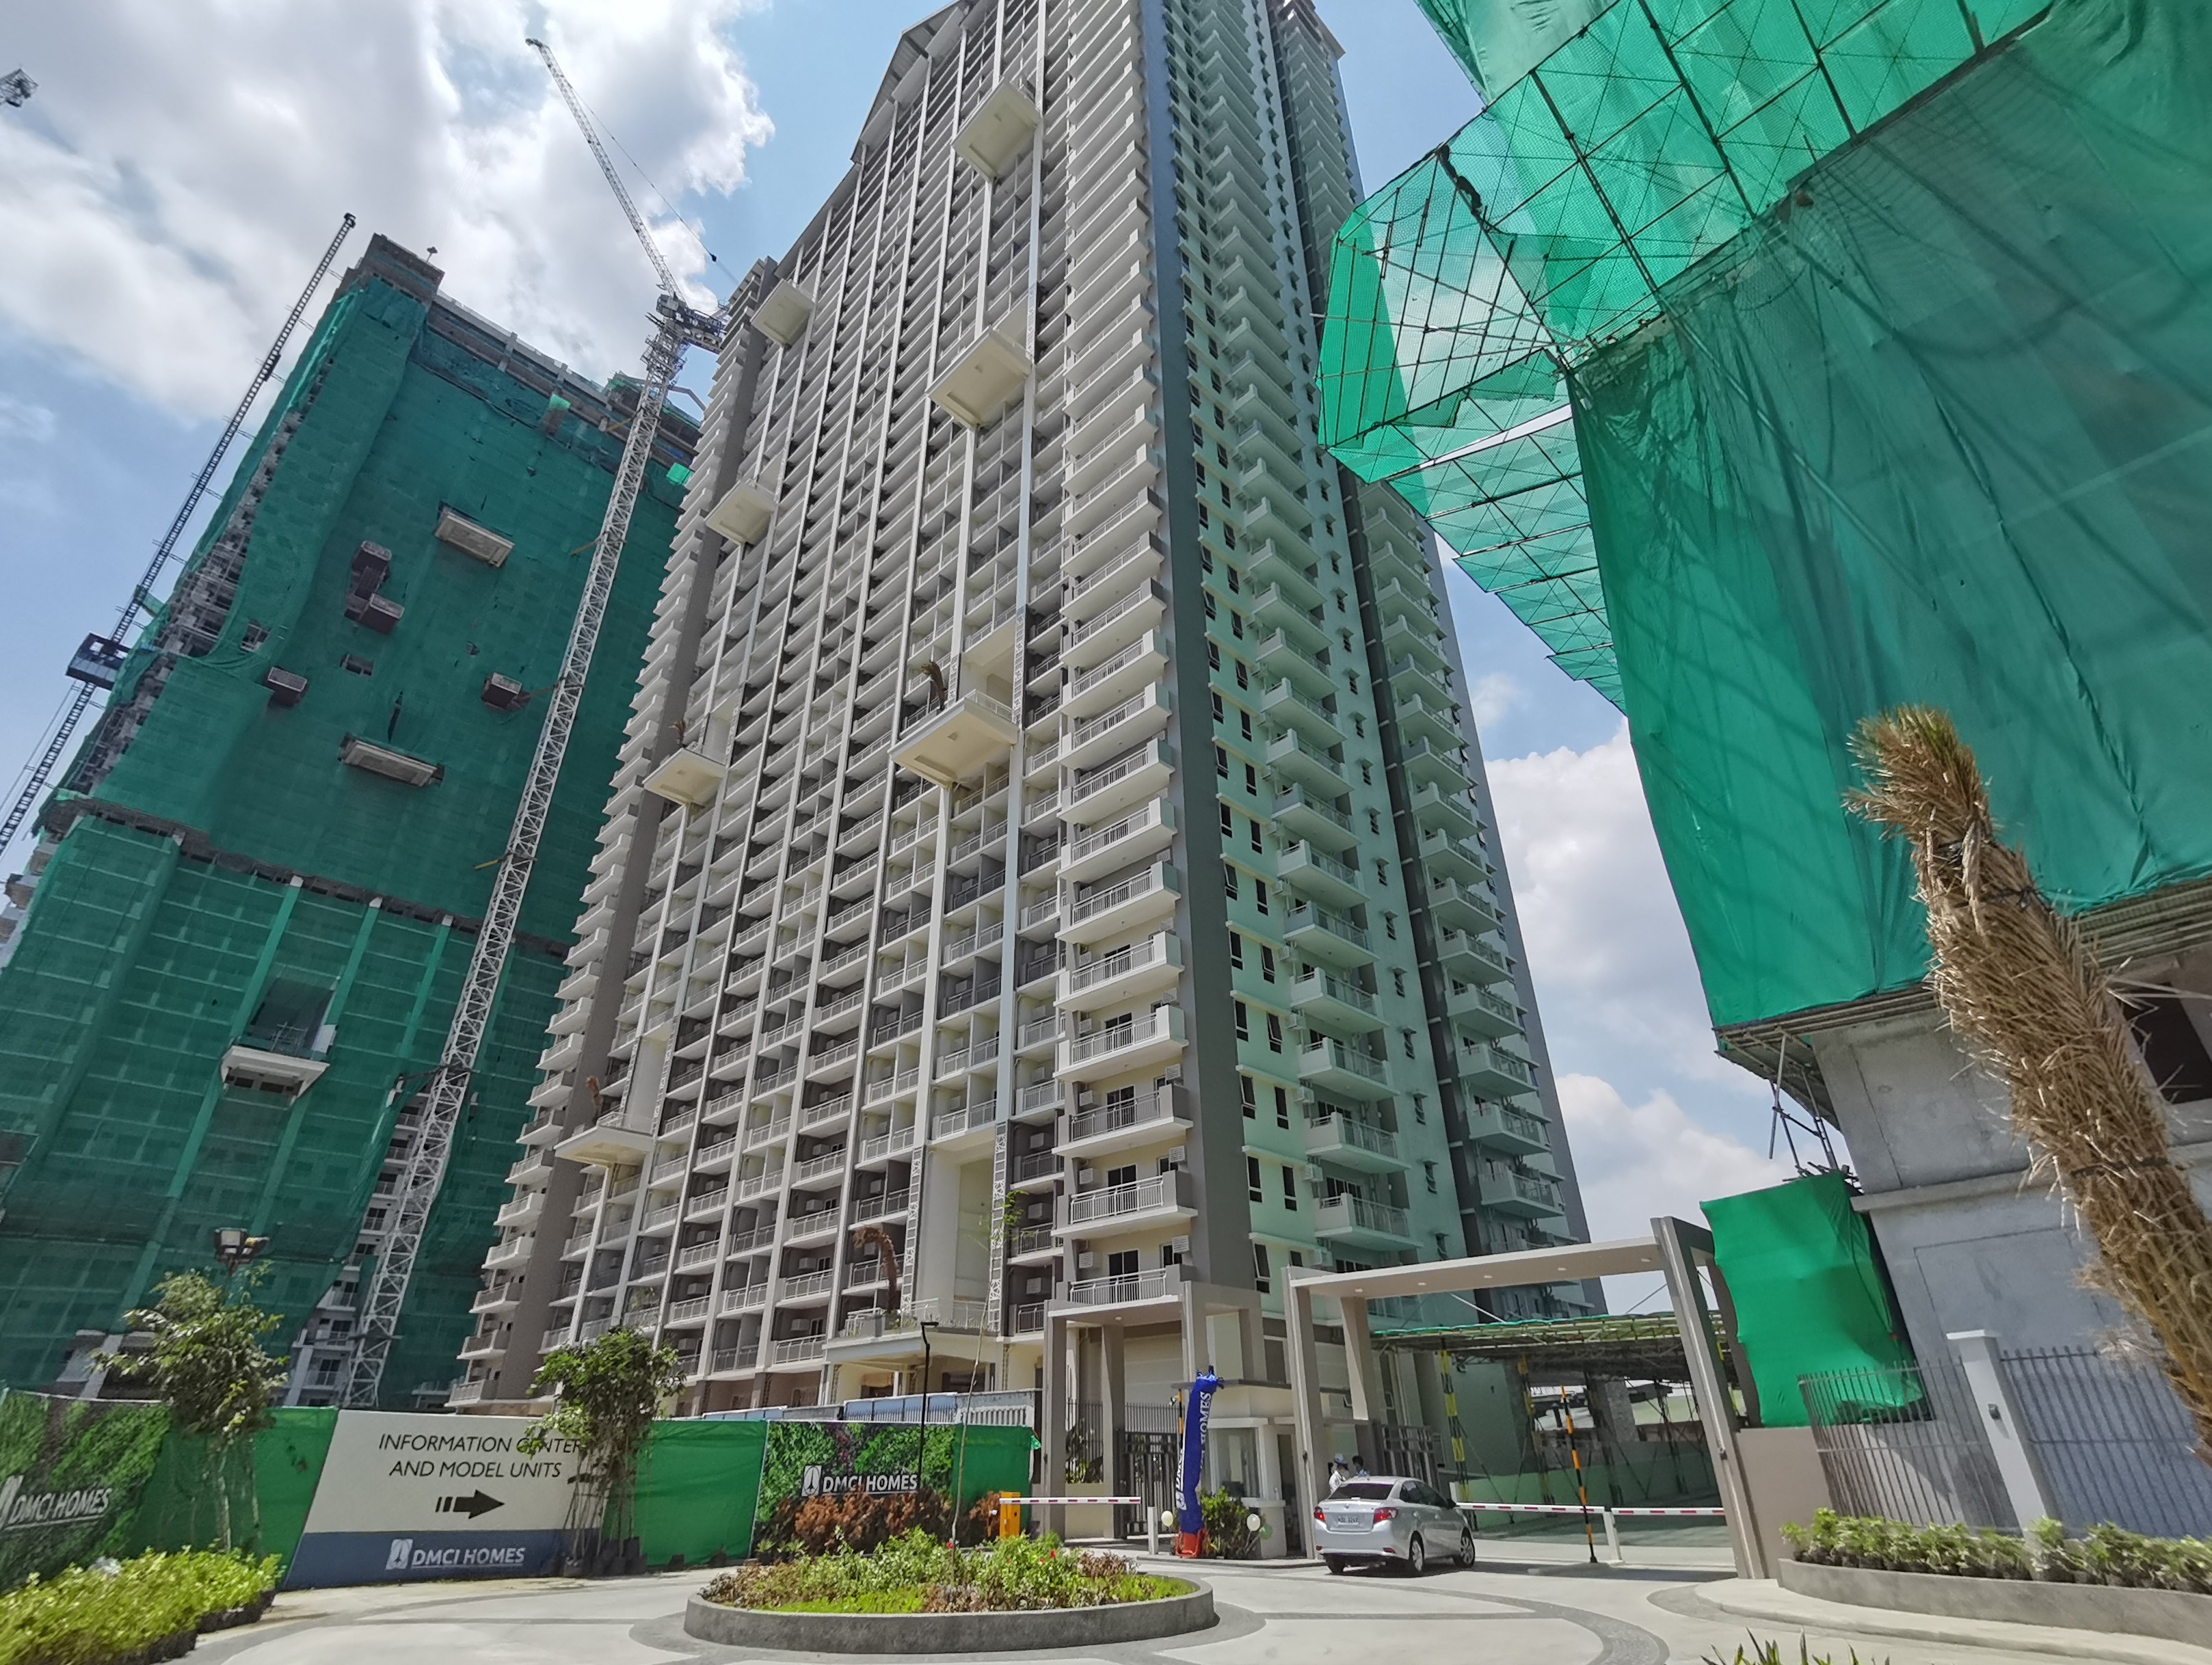 Prisma Residences first tower in Pasig